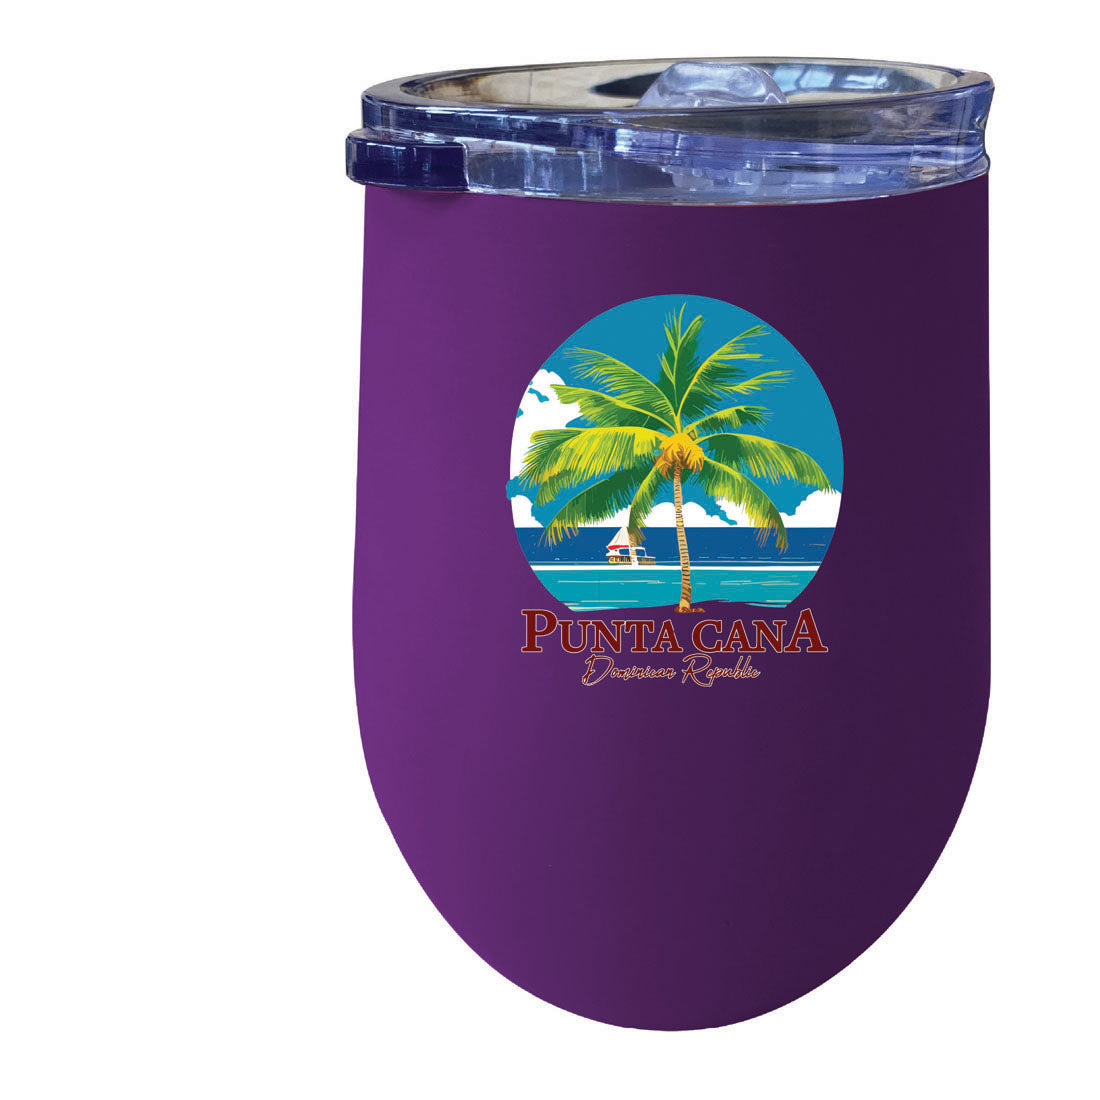 Punta Cana Dominican Republic Souvenir 12 Oz Insulated Wine Stainless Steel Tumbler - White, PALM